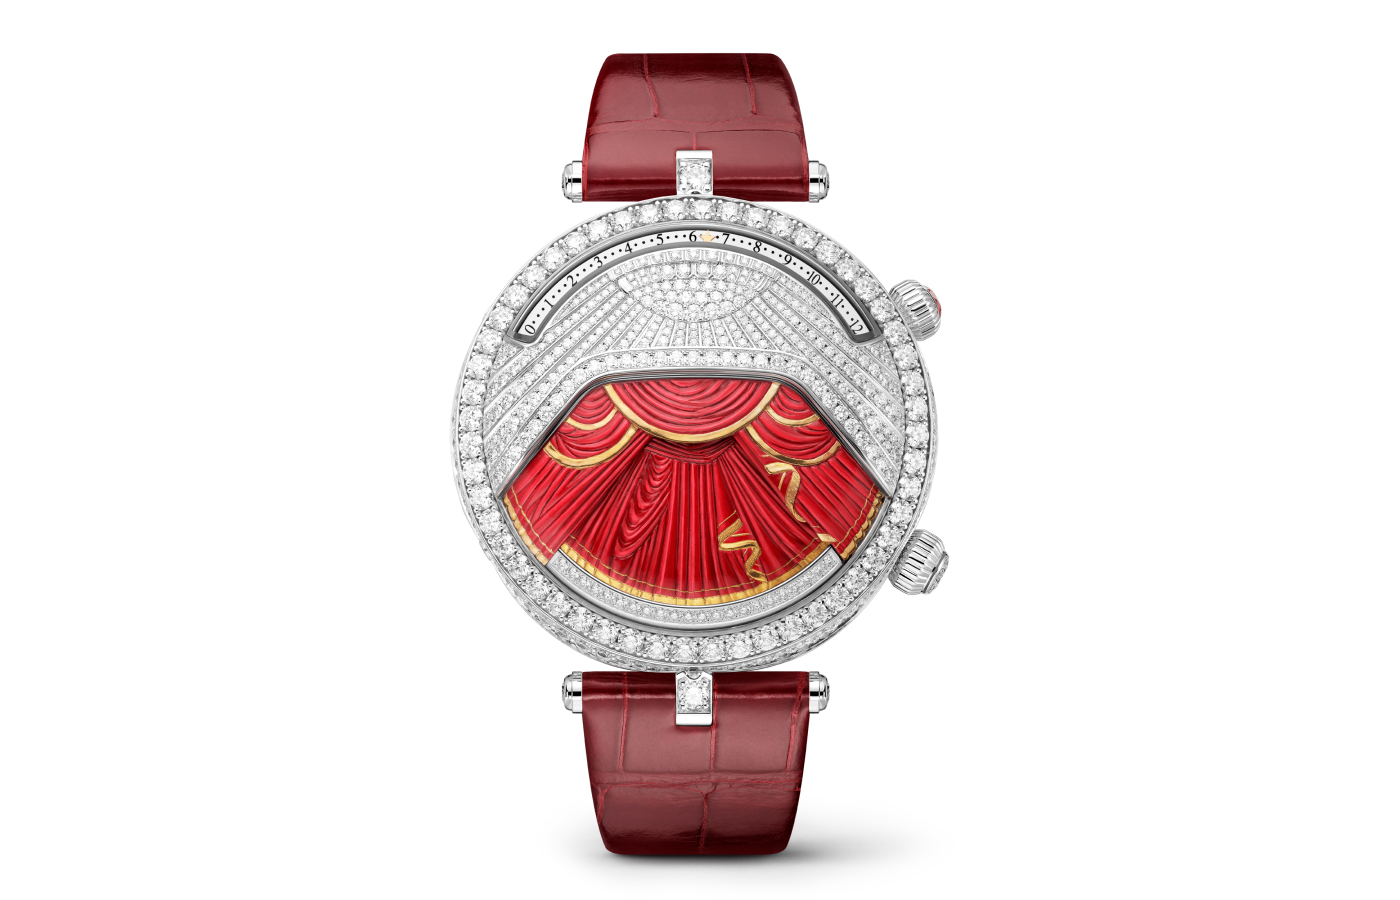 The Van Cleef & Arpels Lady Arpels Ballerine Musicale Rubis watch in 18k white gold with diamonds and rubies, to be showcased at the Poetry of Time exhibition in London